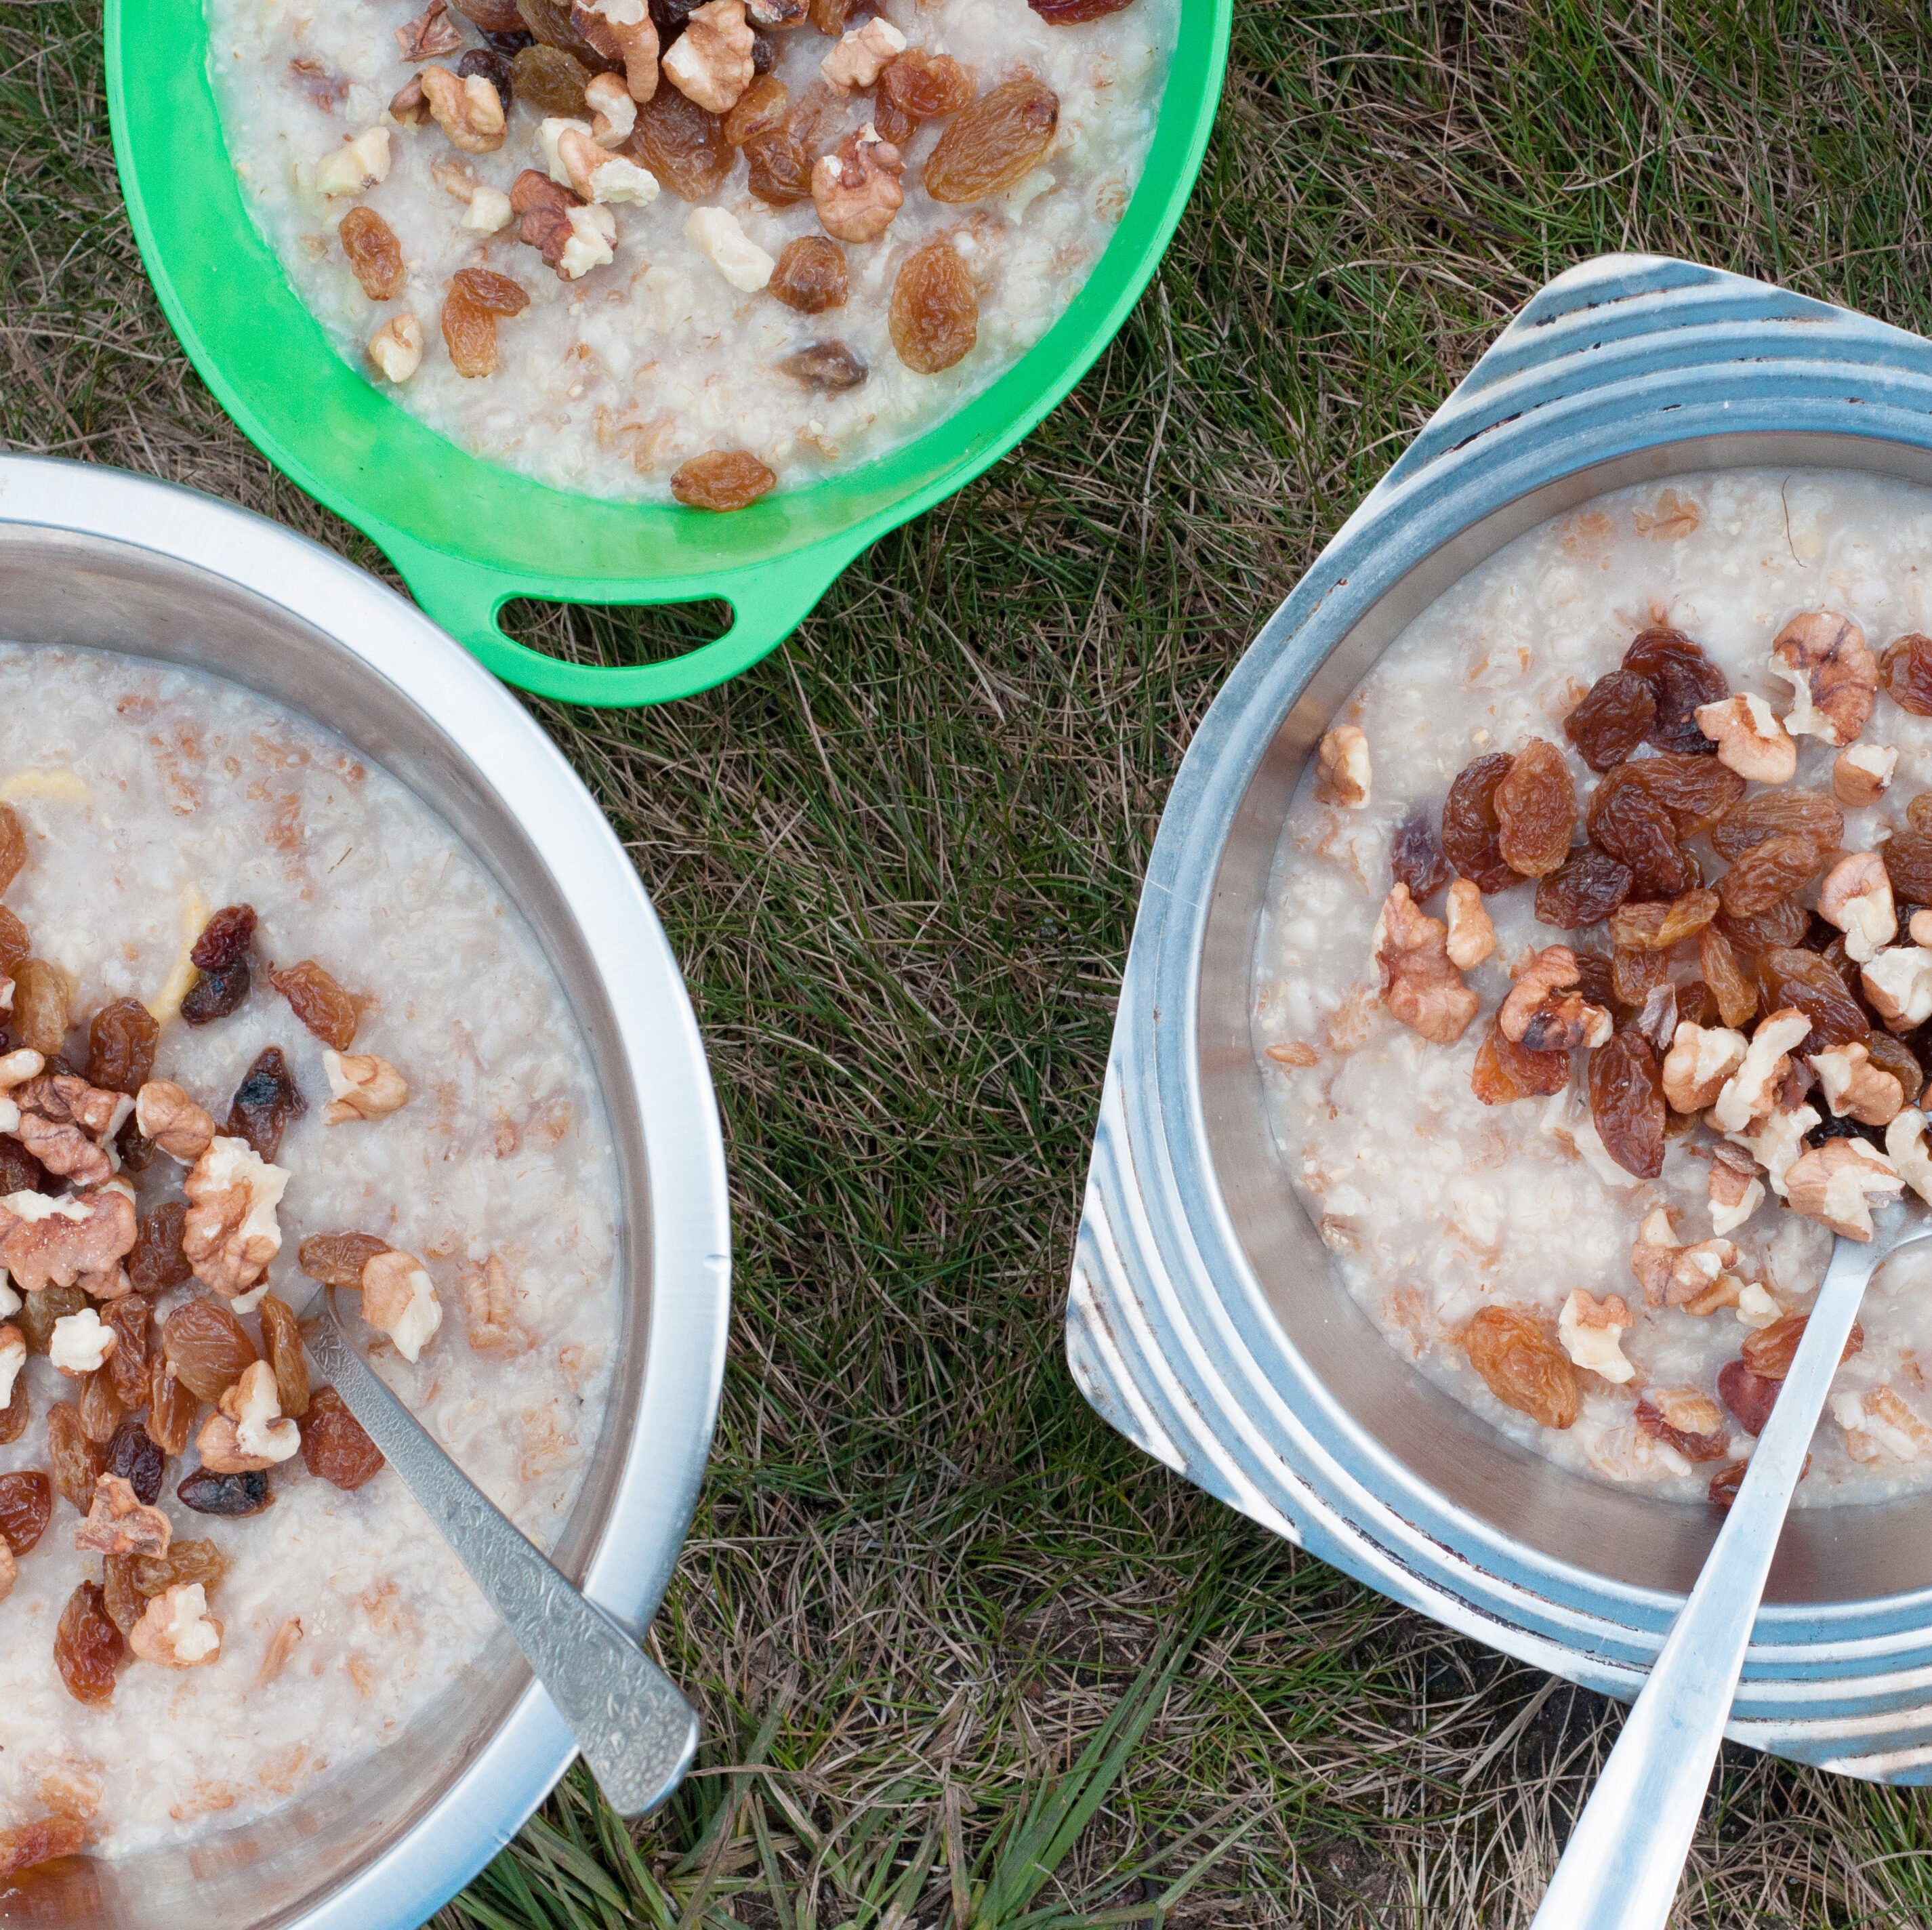 Camping Oatmeal in Bowls